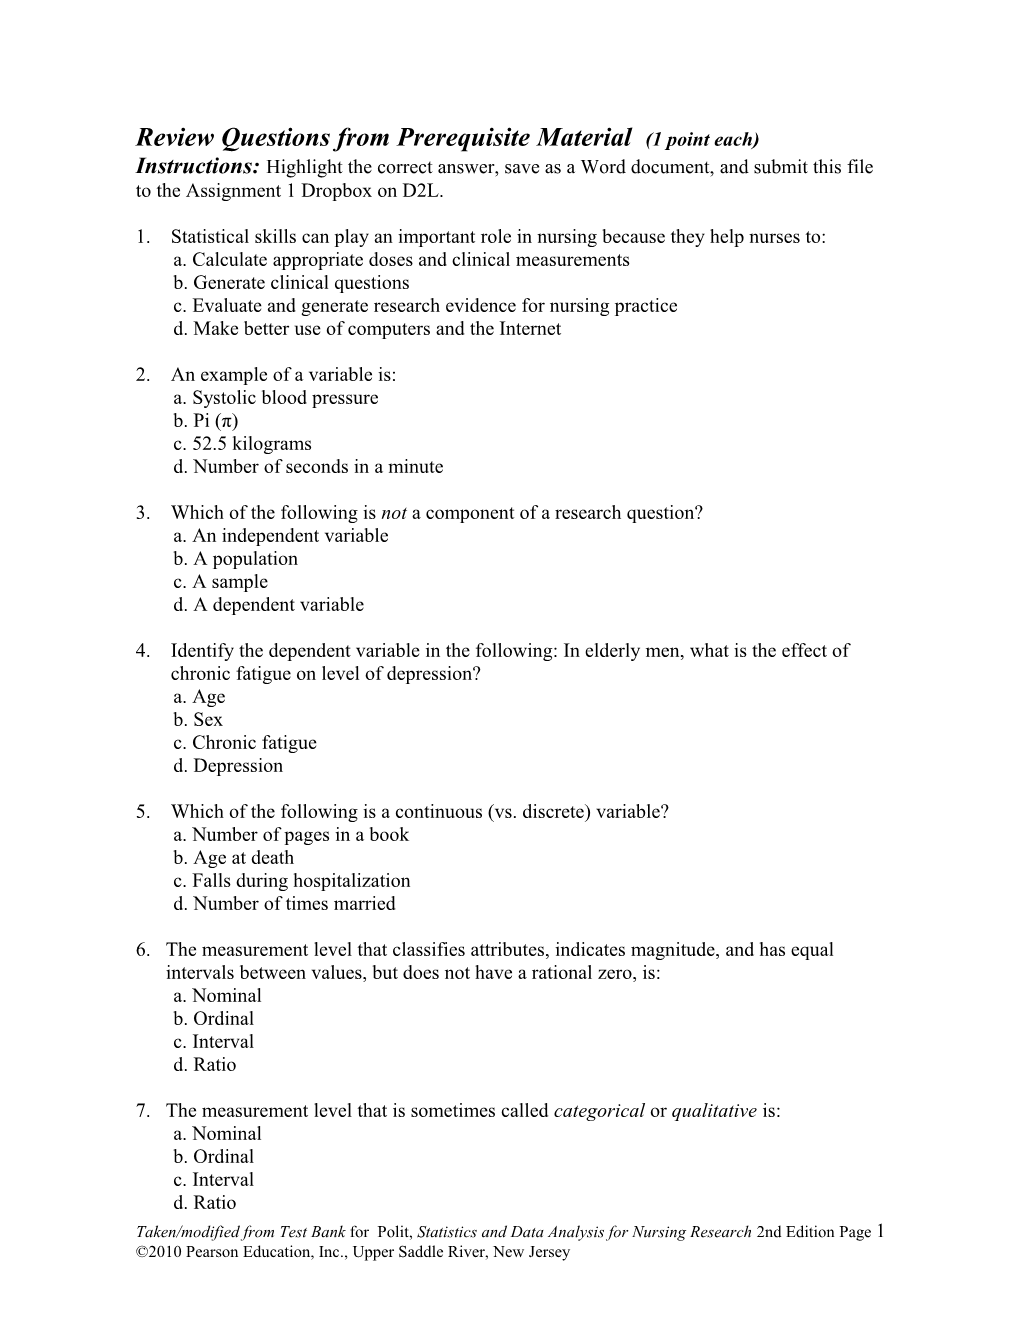 Review Questions from Prerequisite Material (1 Point Each)